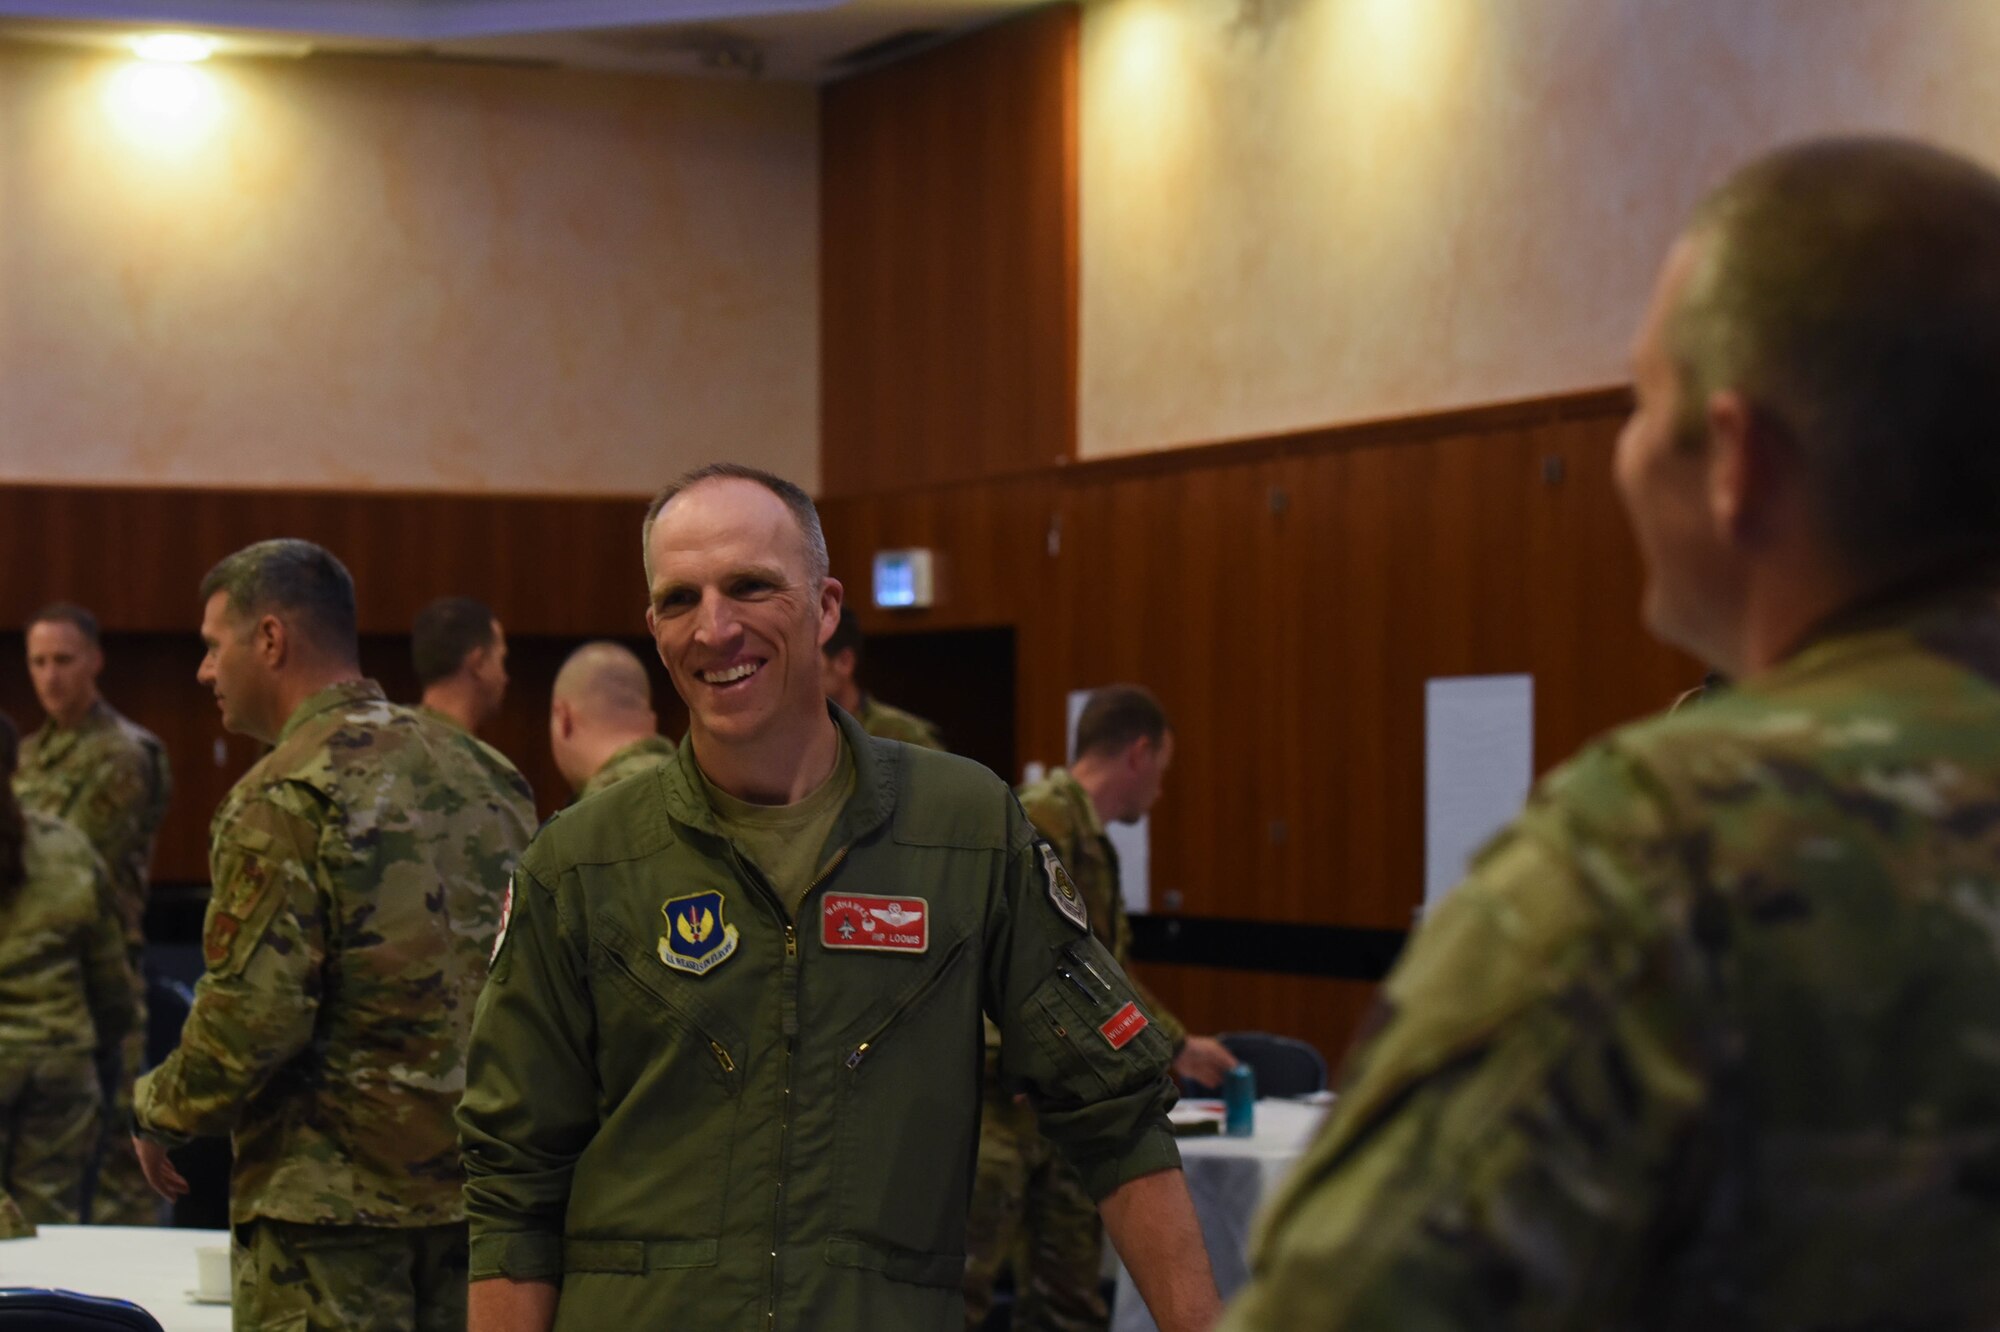 U.S. Air Force Lt. Col. Shaun Loomis, 480th Fighter Squadron commander, talks to his fellow service members during the Key Spouse Symposium, May 25, 2022, on Spangdahlem Air Base, Germany. Unit leaders attended the event to show support and unity within the Key Spouse Program.
(U.S. Air Force photo by Airman 1st Class Imani West)